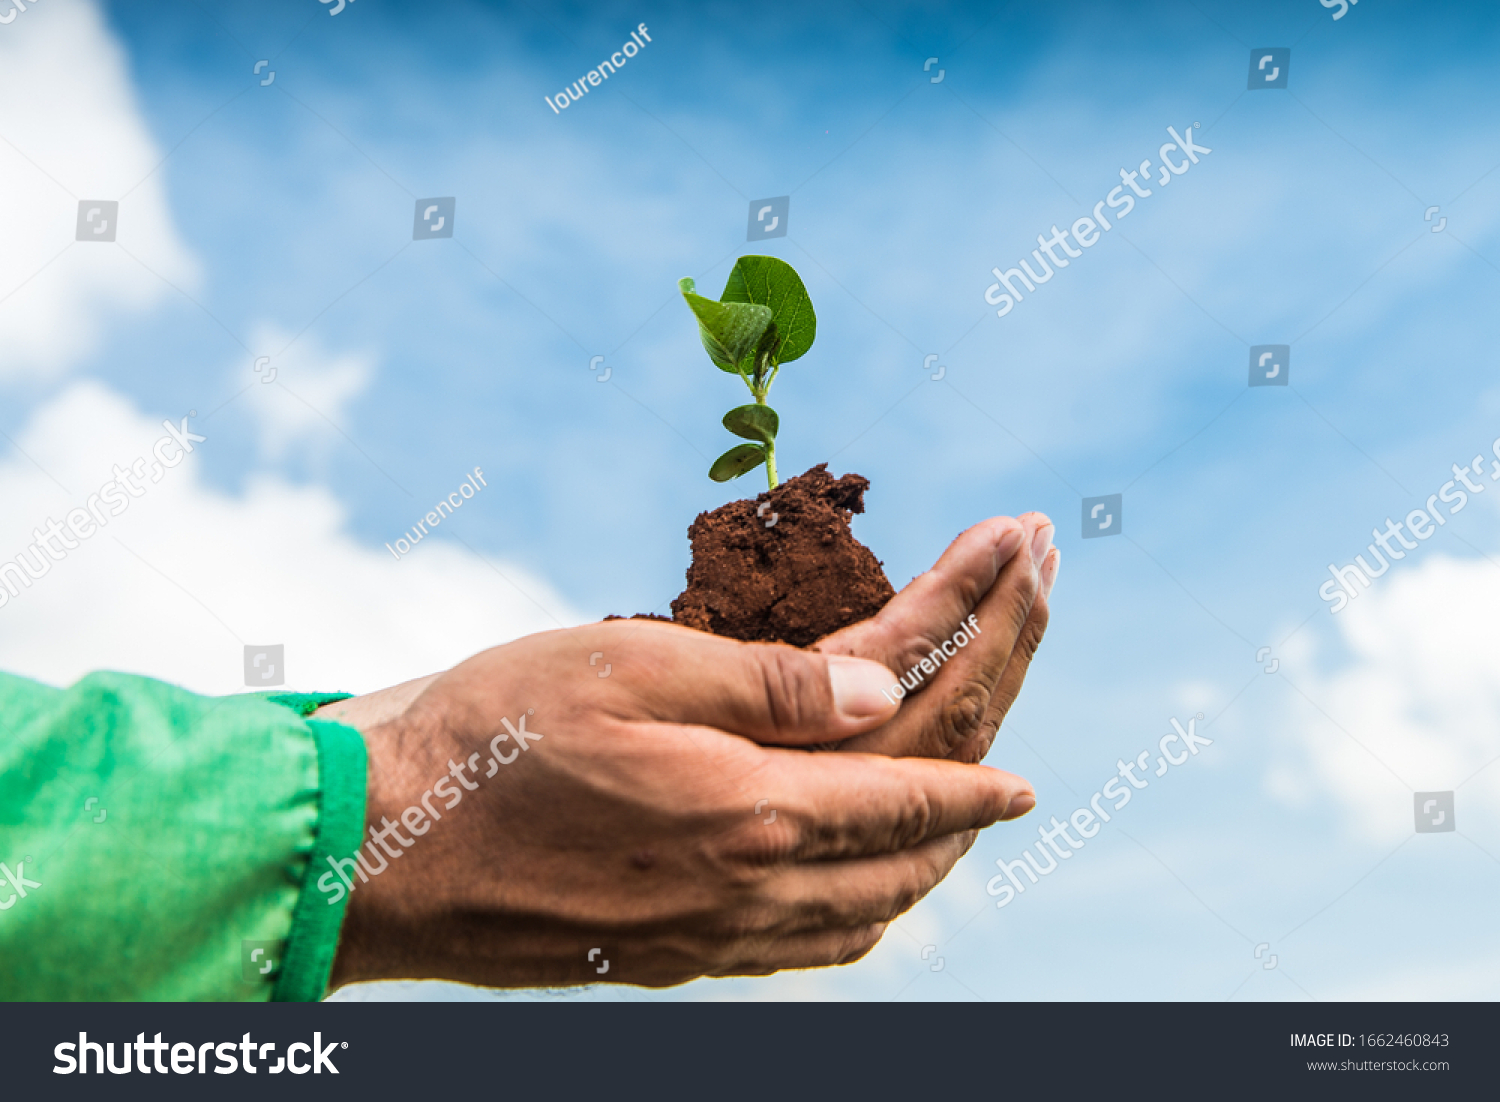 Agriculture - Hands holding a green young plant and a handful of the earth in sunlight, blurred green background. Ecology, life, earth day concept. - agribusiness. #1662460843